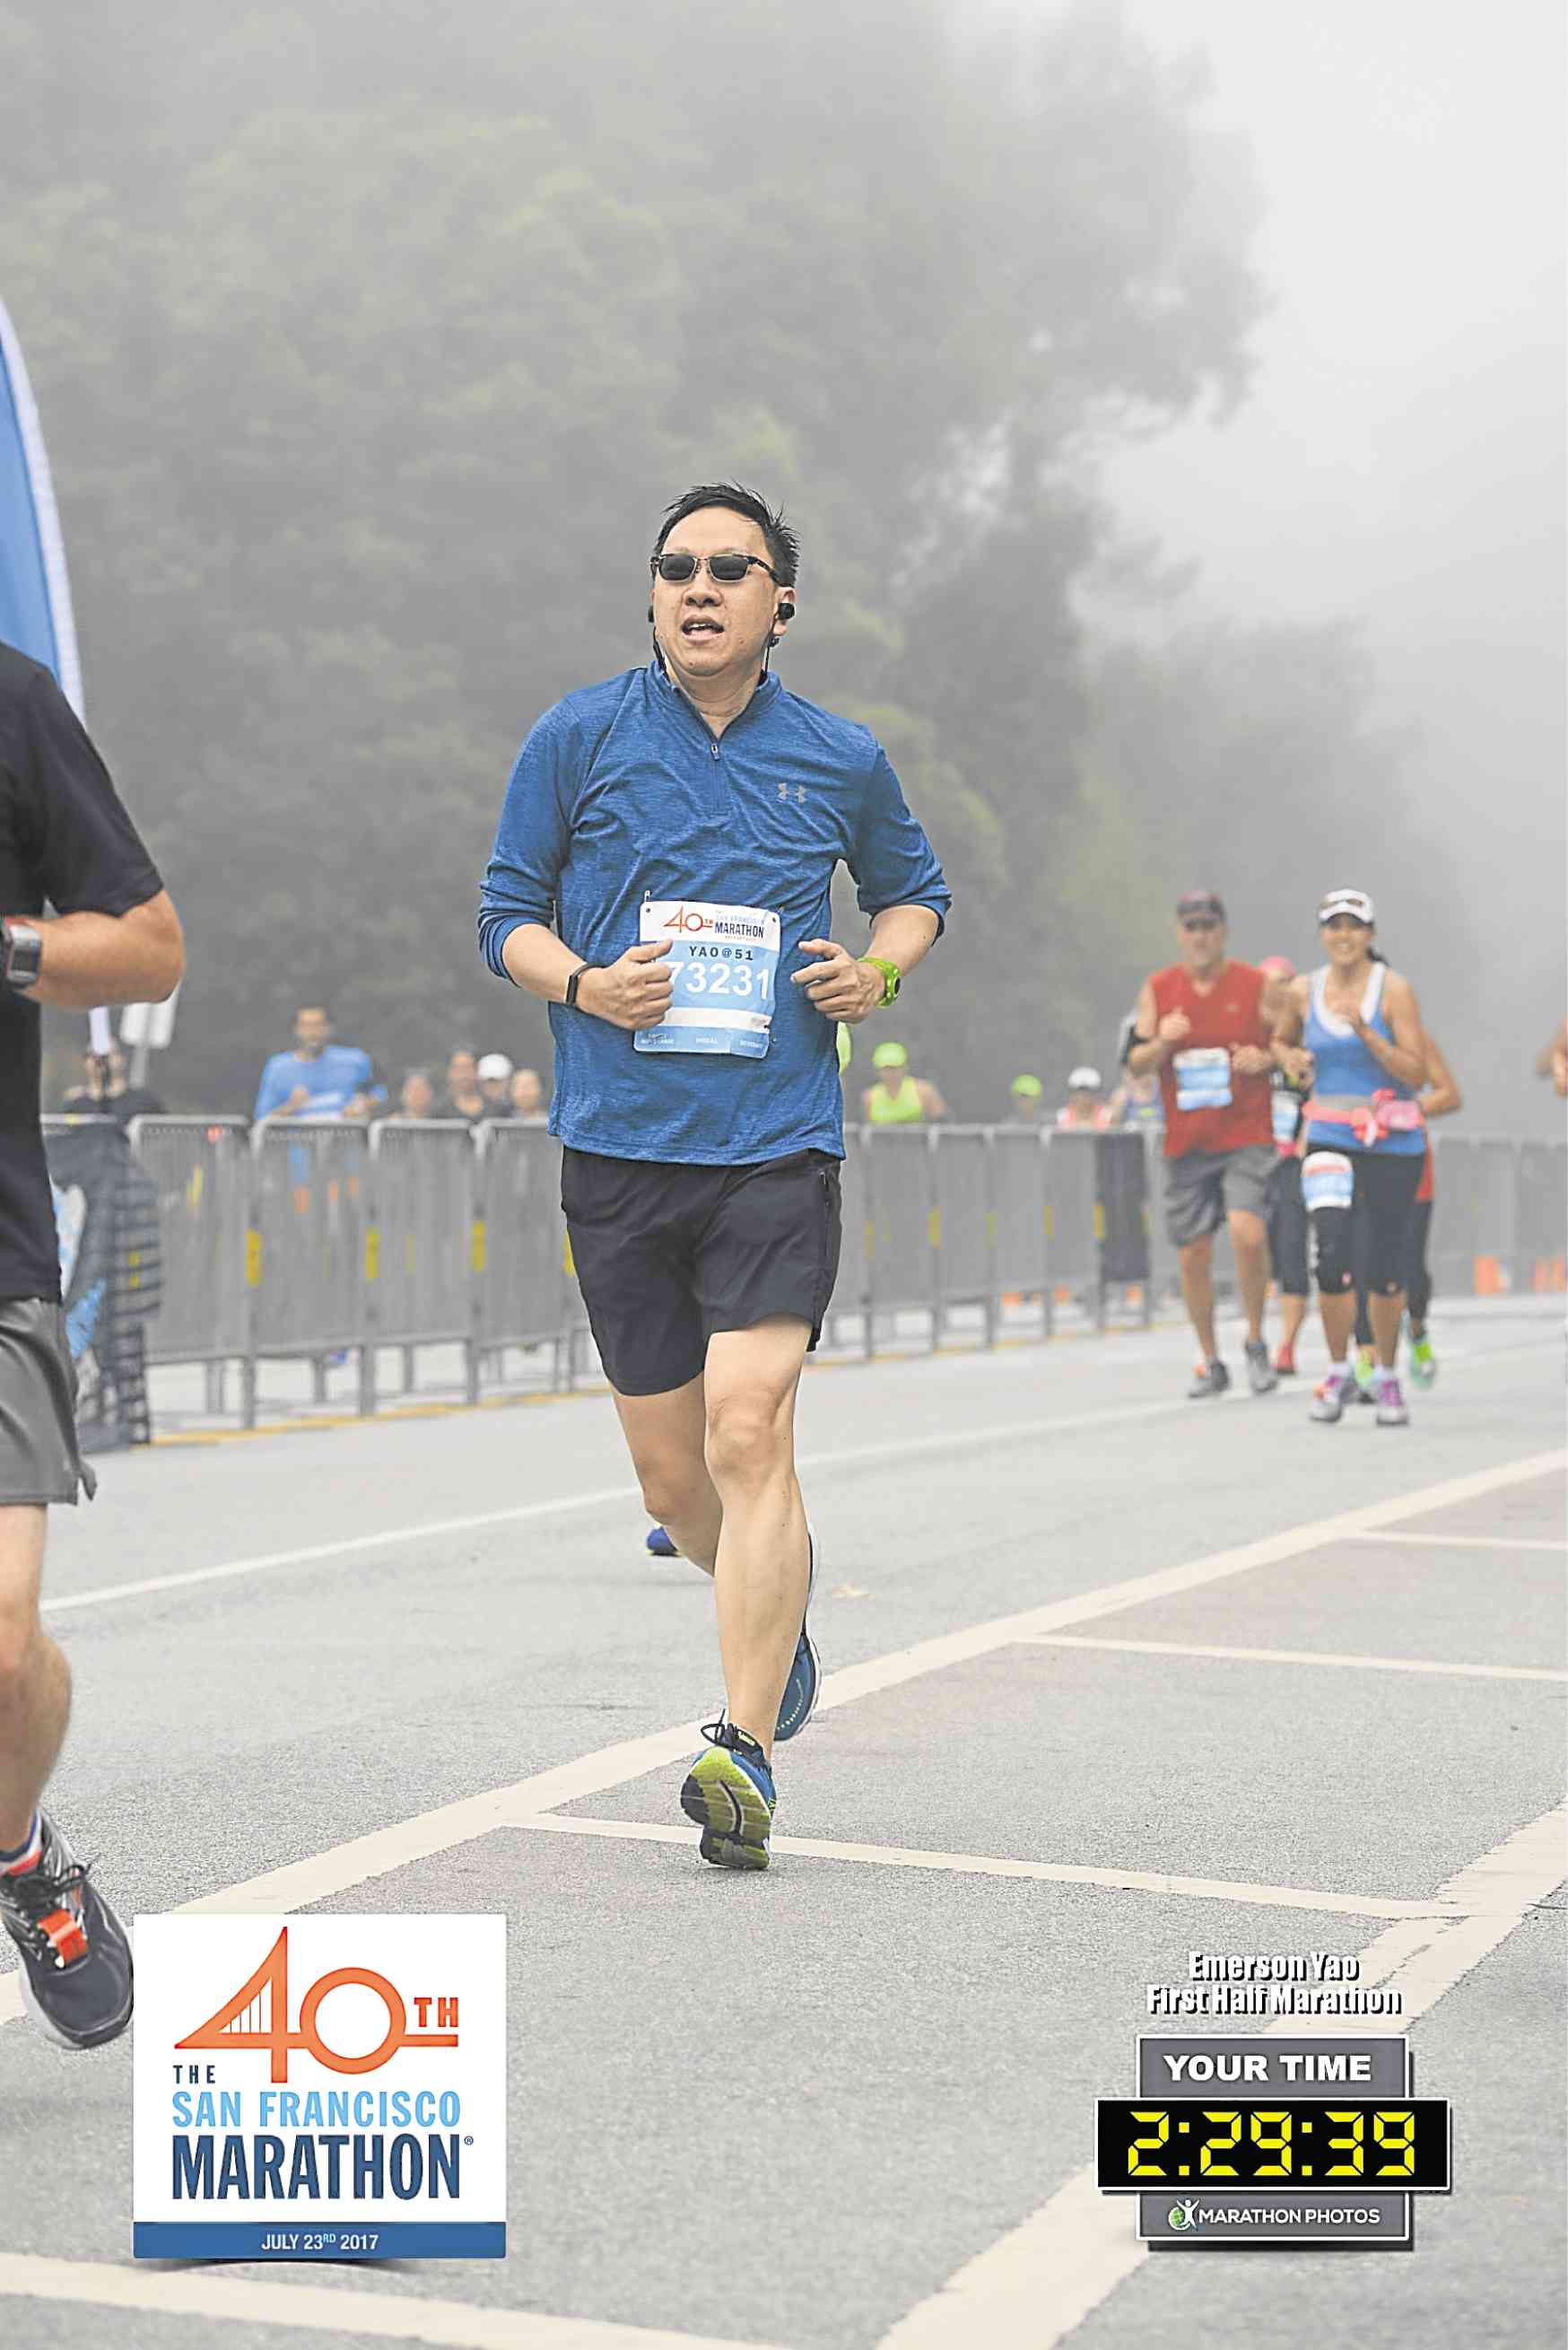 How Emerson Yao became a marathon runner after 50 | Inquirer Lifestyle